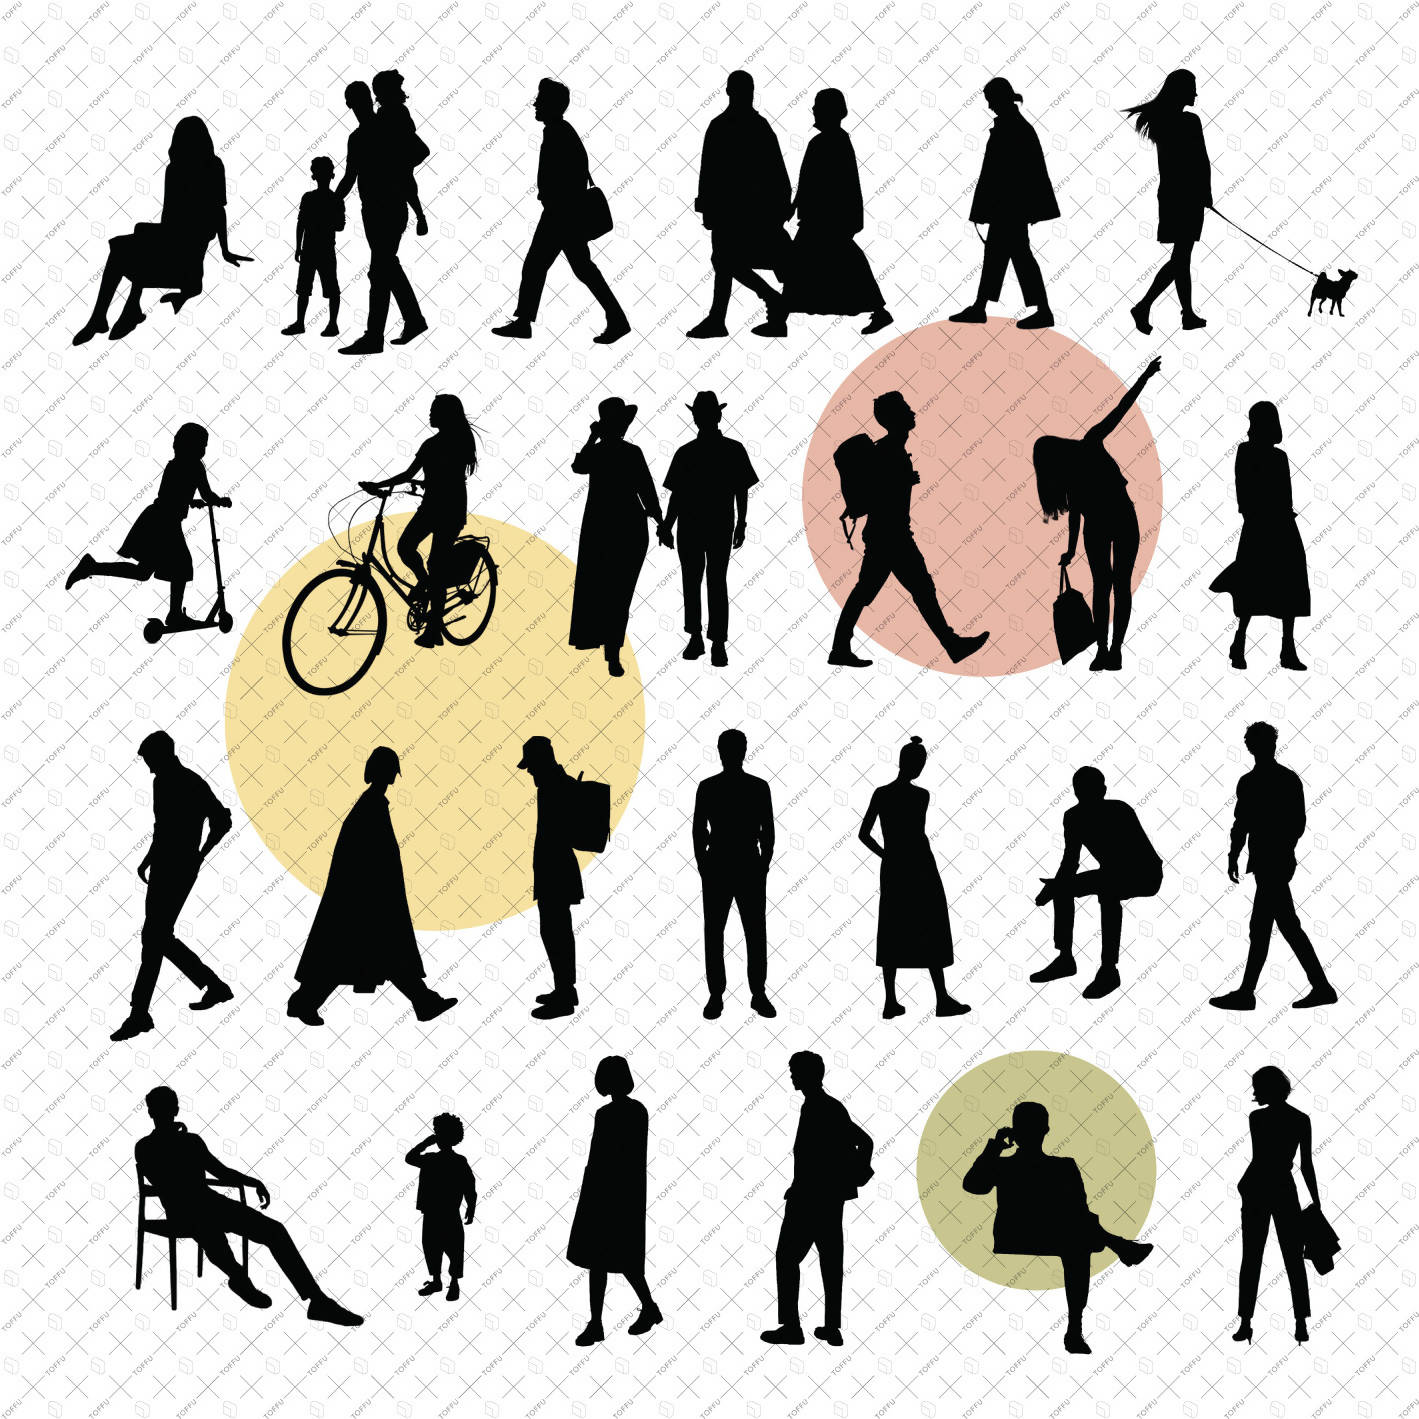 person walking silhouette png